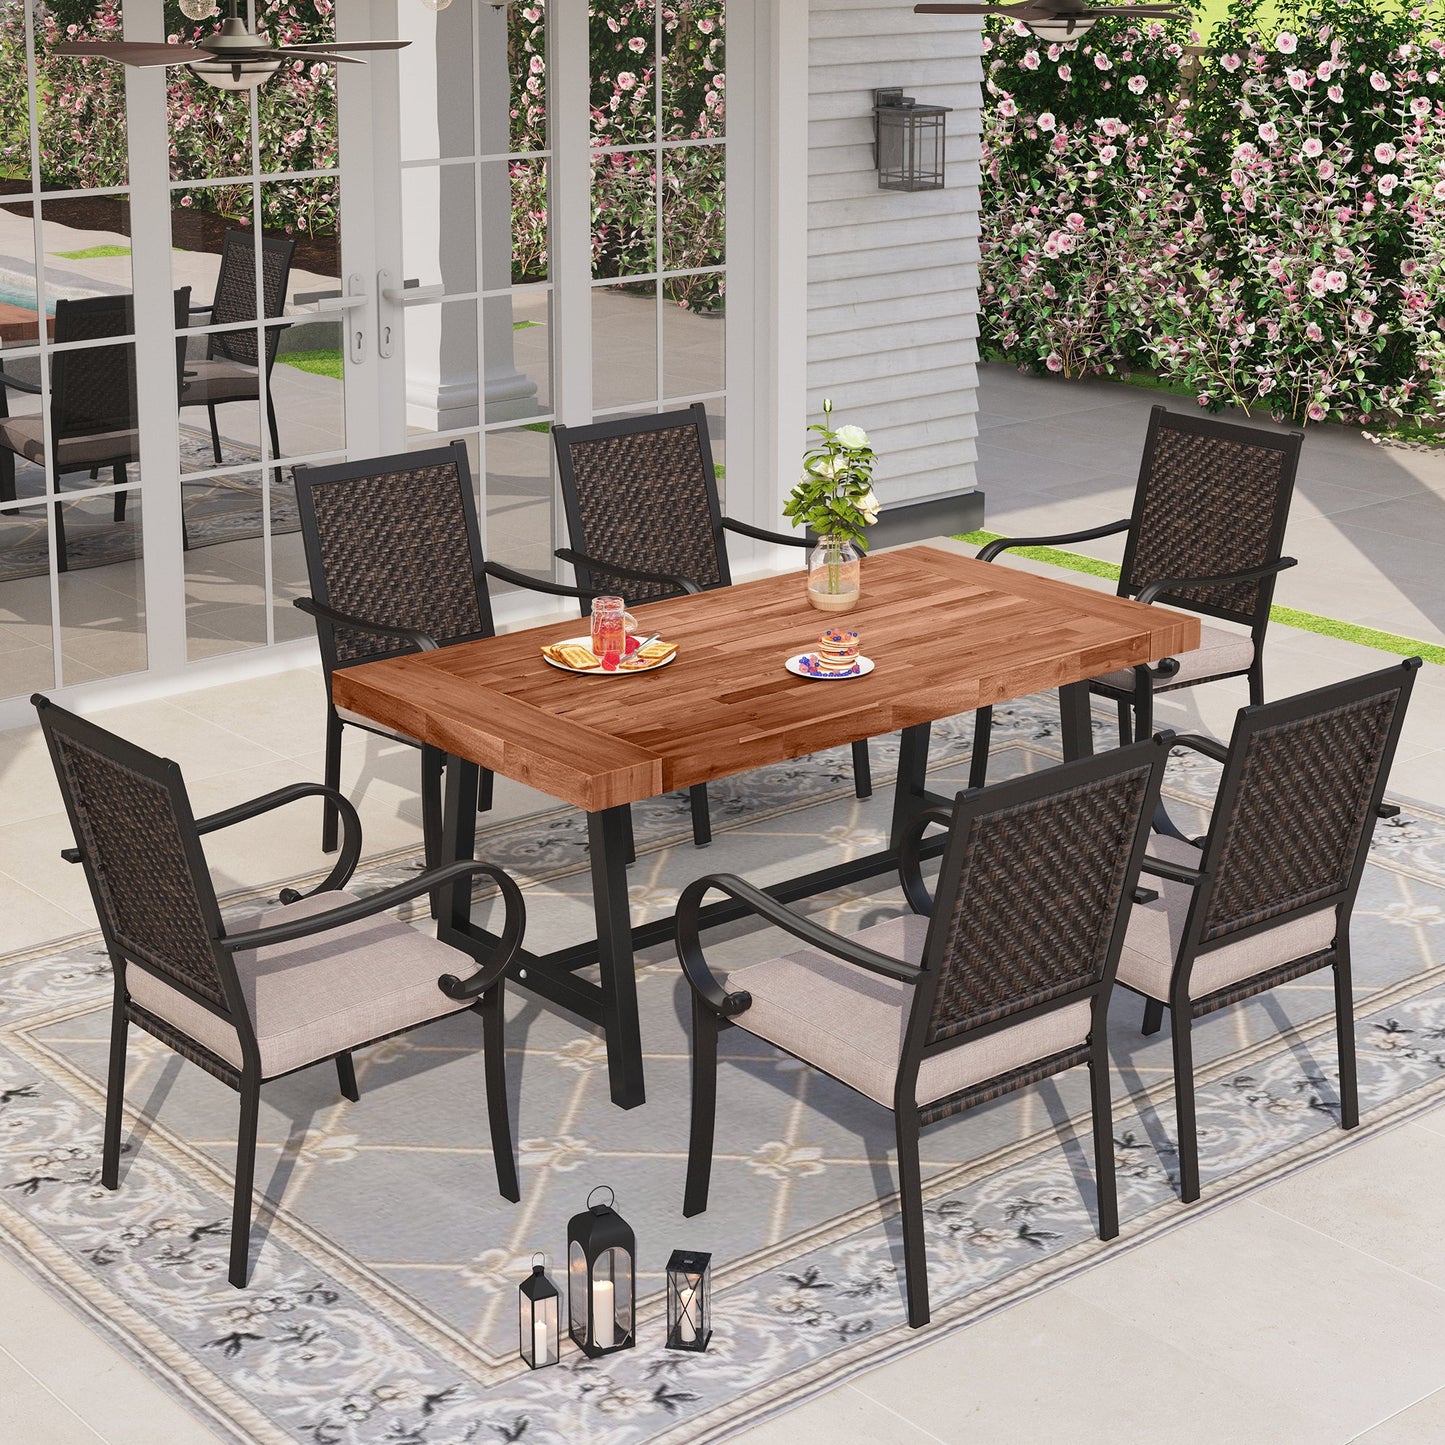 Sophia & William 7 Pieces Outdoor Patio Dining Set Wicker Rattan Chairs and Wood Table for 6-person